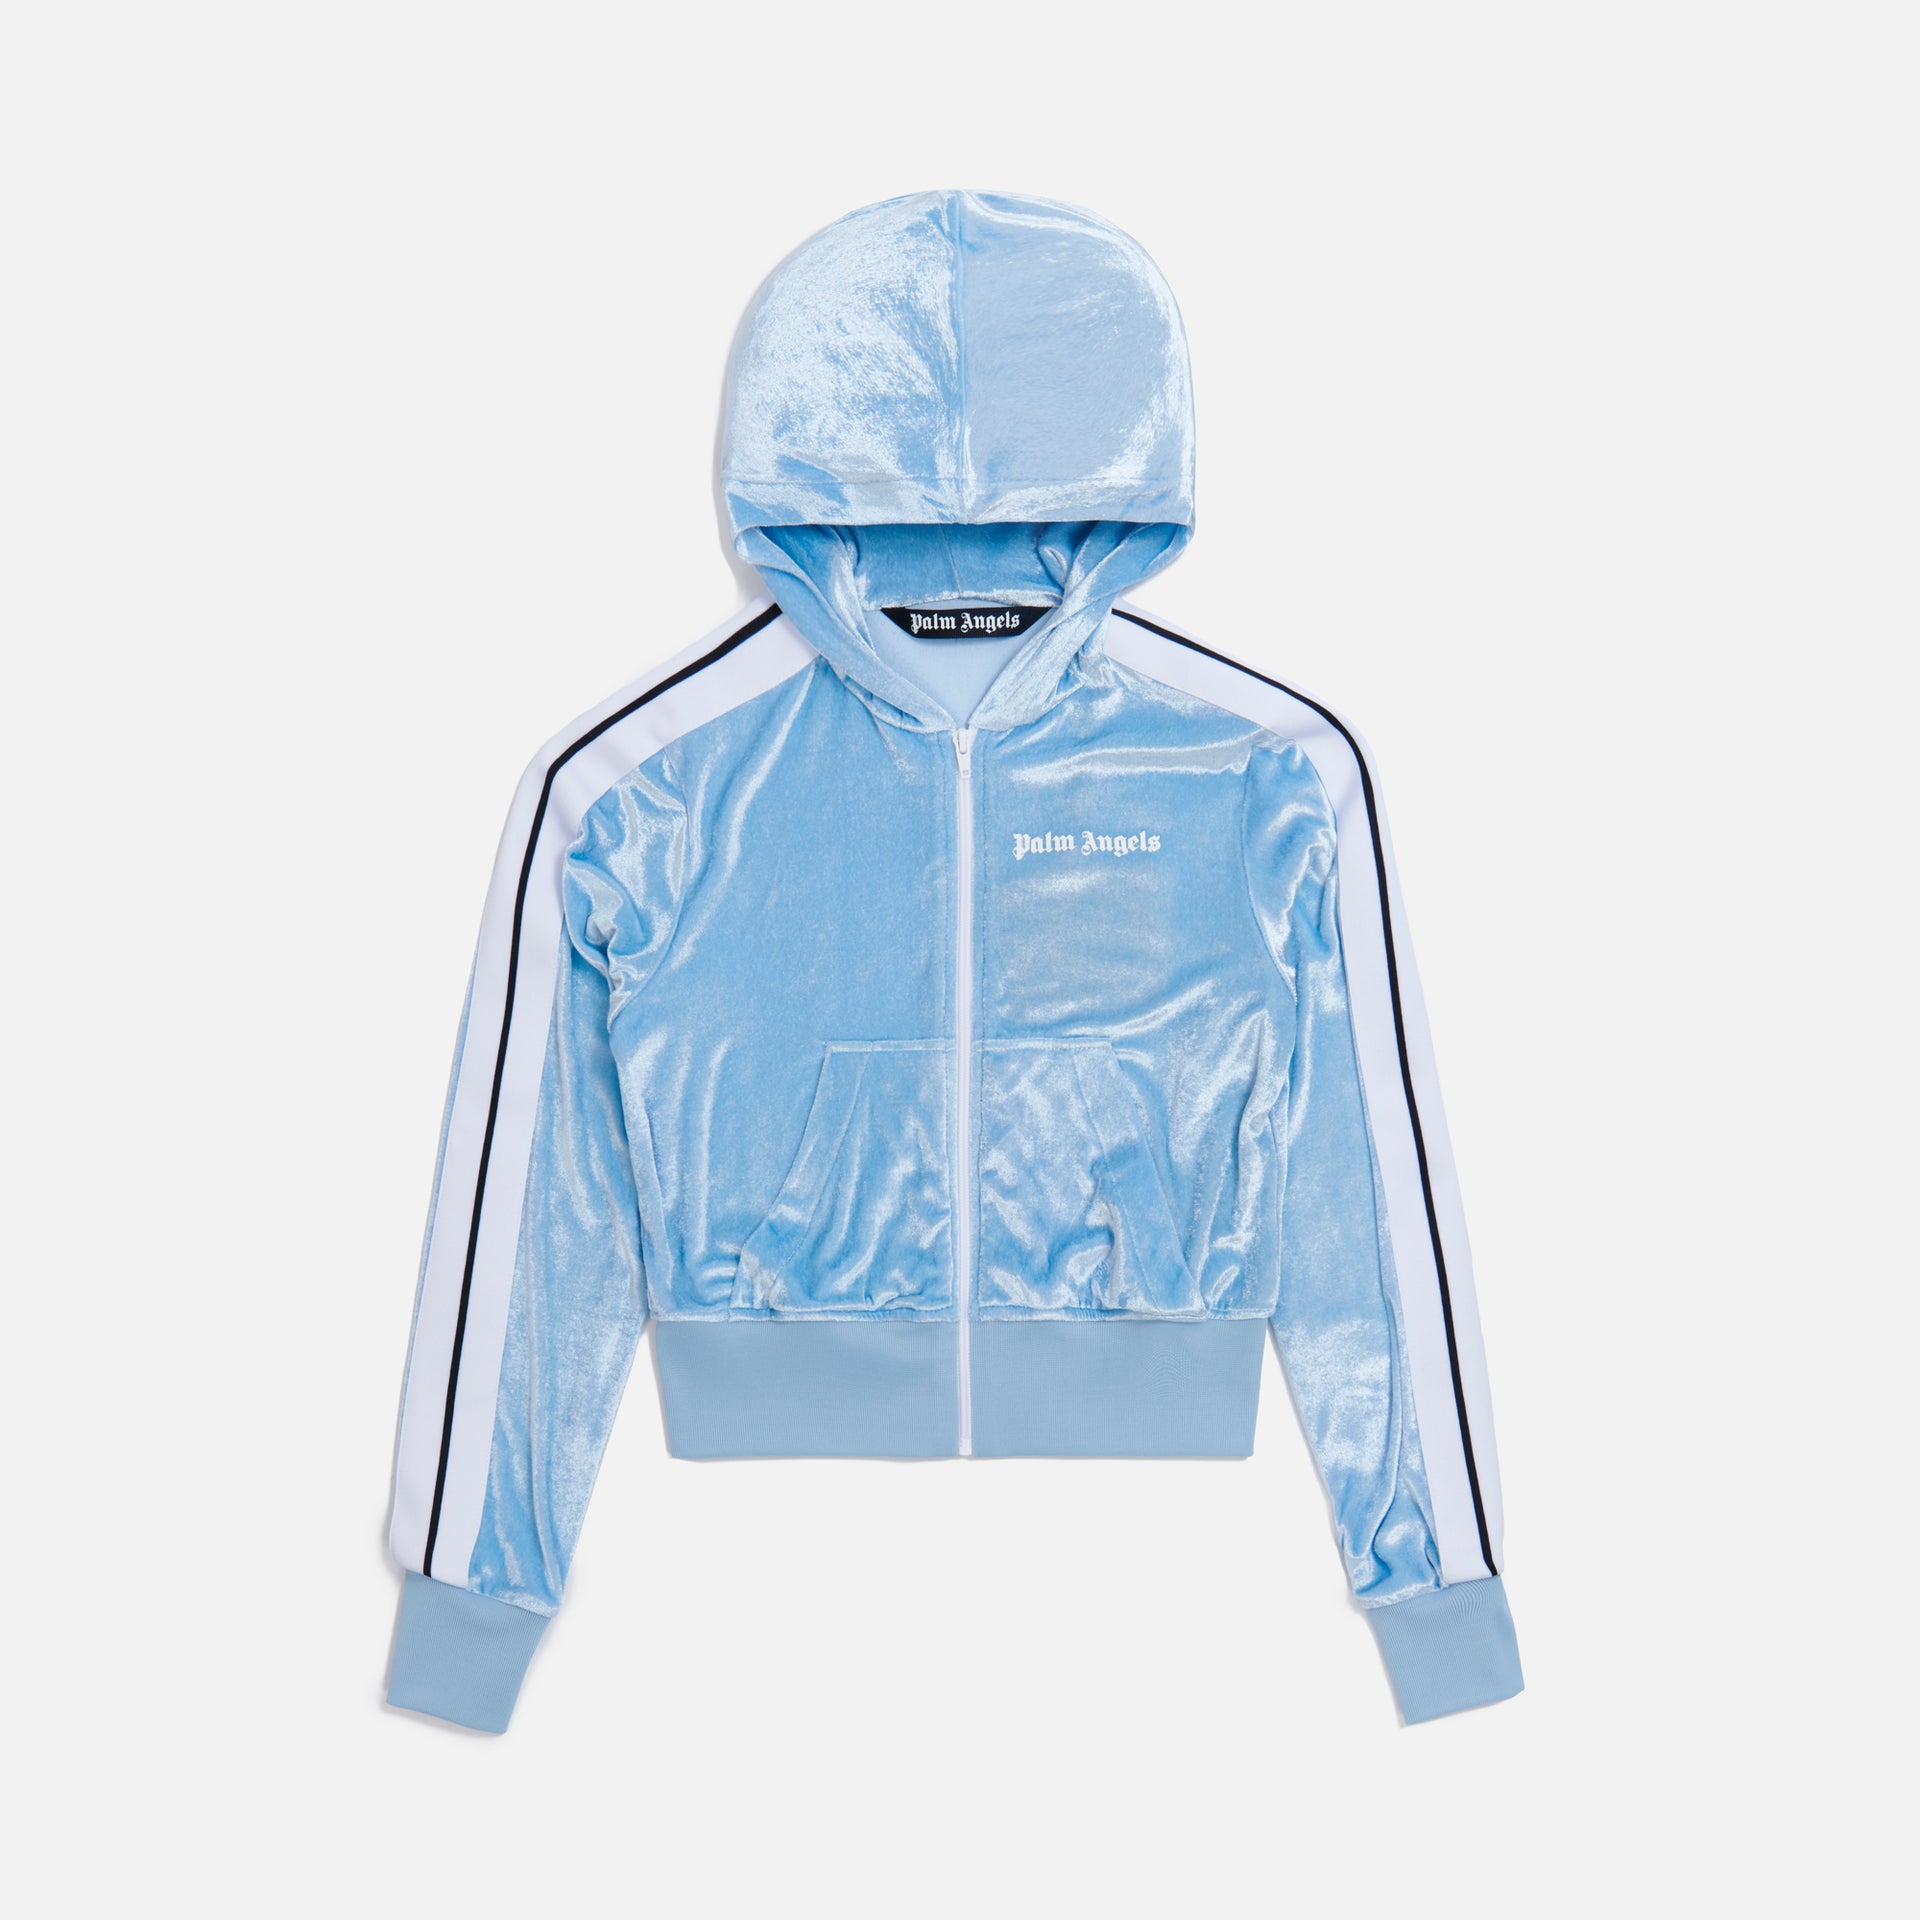 Palm Angels Chenille Hooded Track Jacket - Light Blue / White